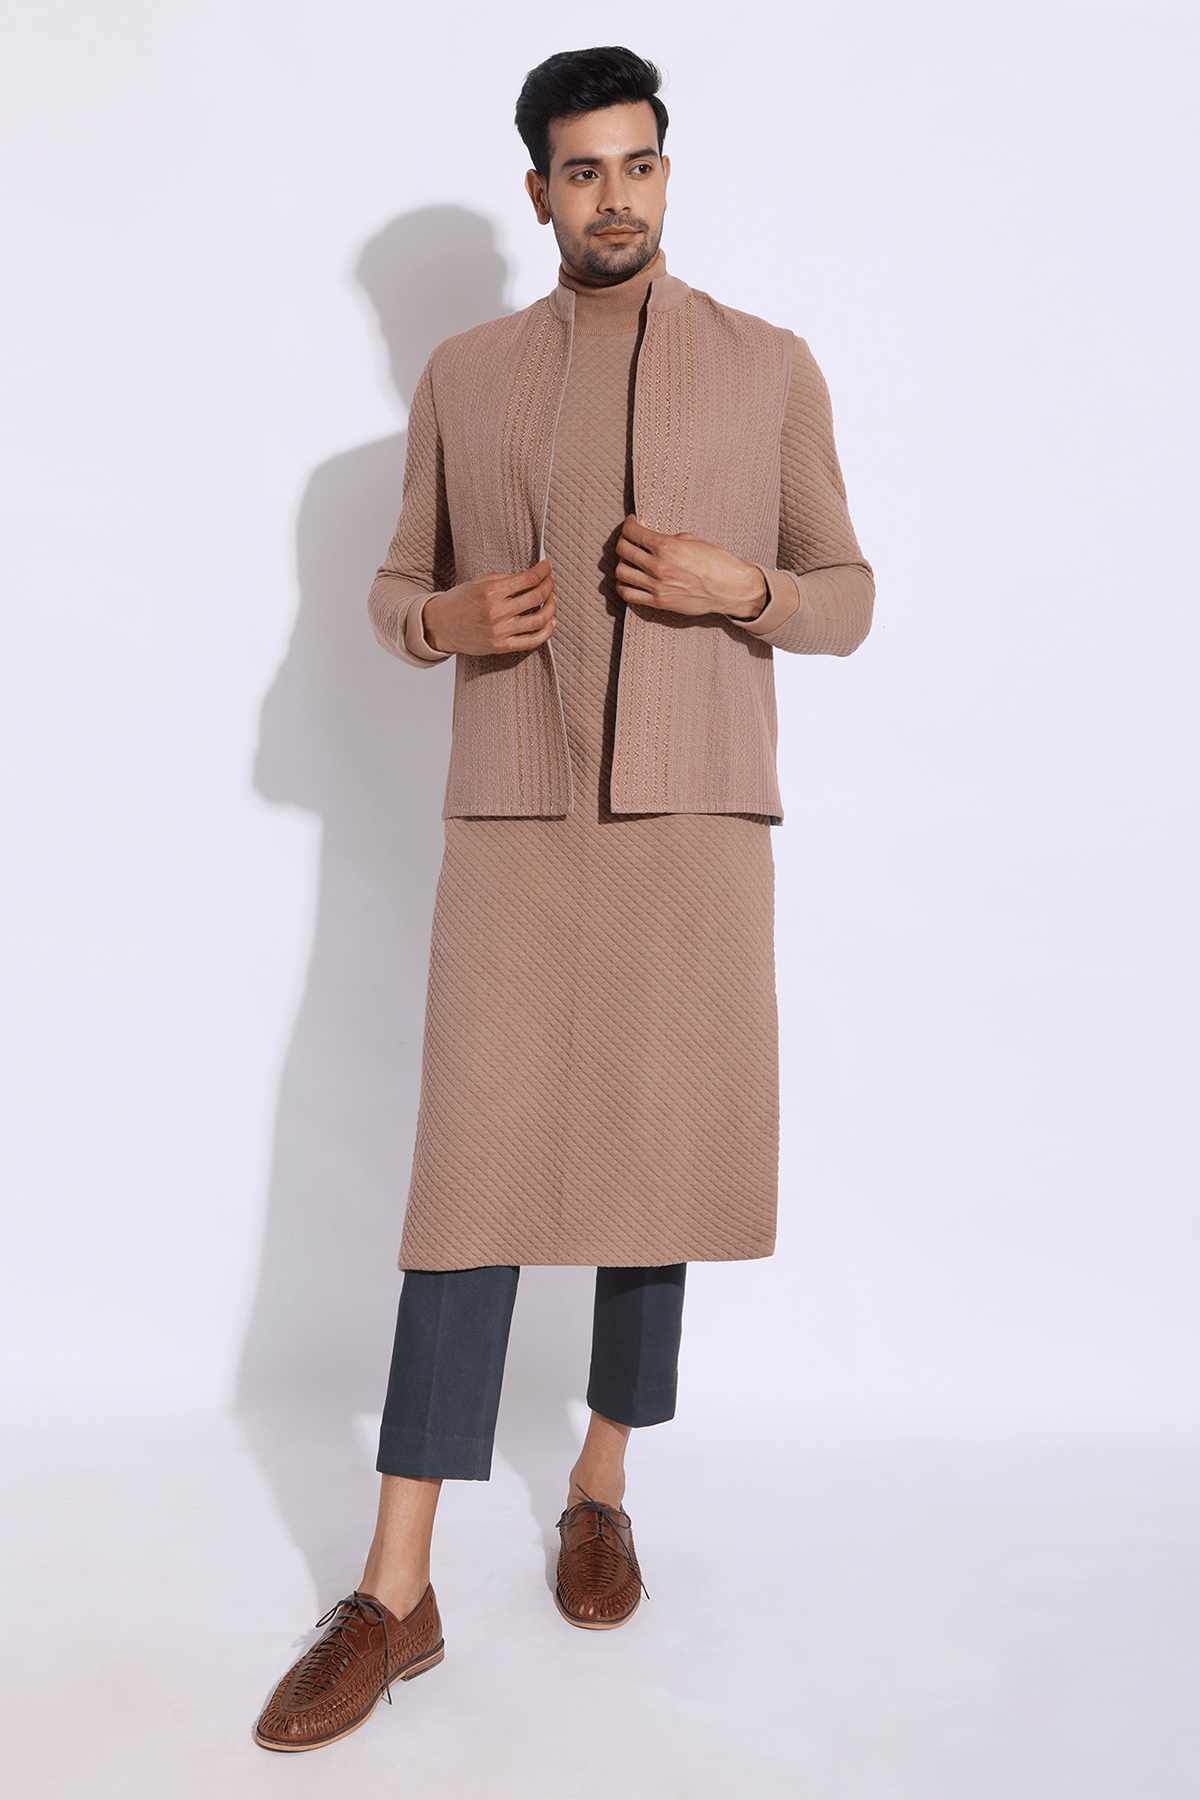 Beige Textured Bandi Jacket with quilted Polo Neck Kurta & Trousers - Kunal Anil Tanna